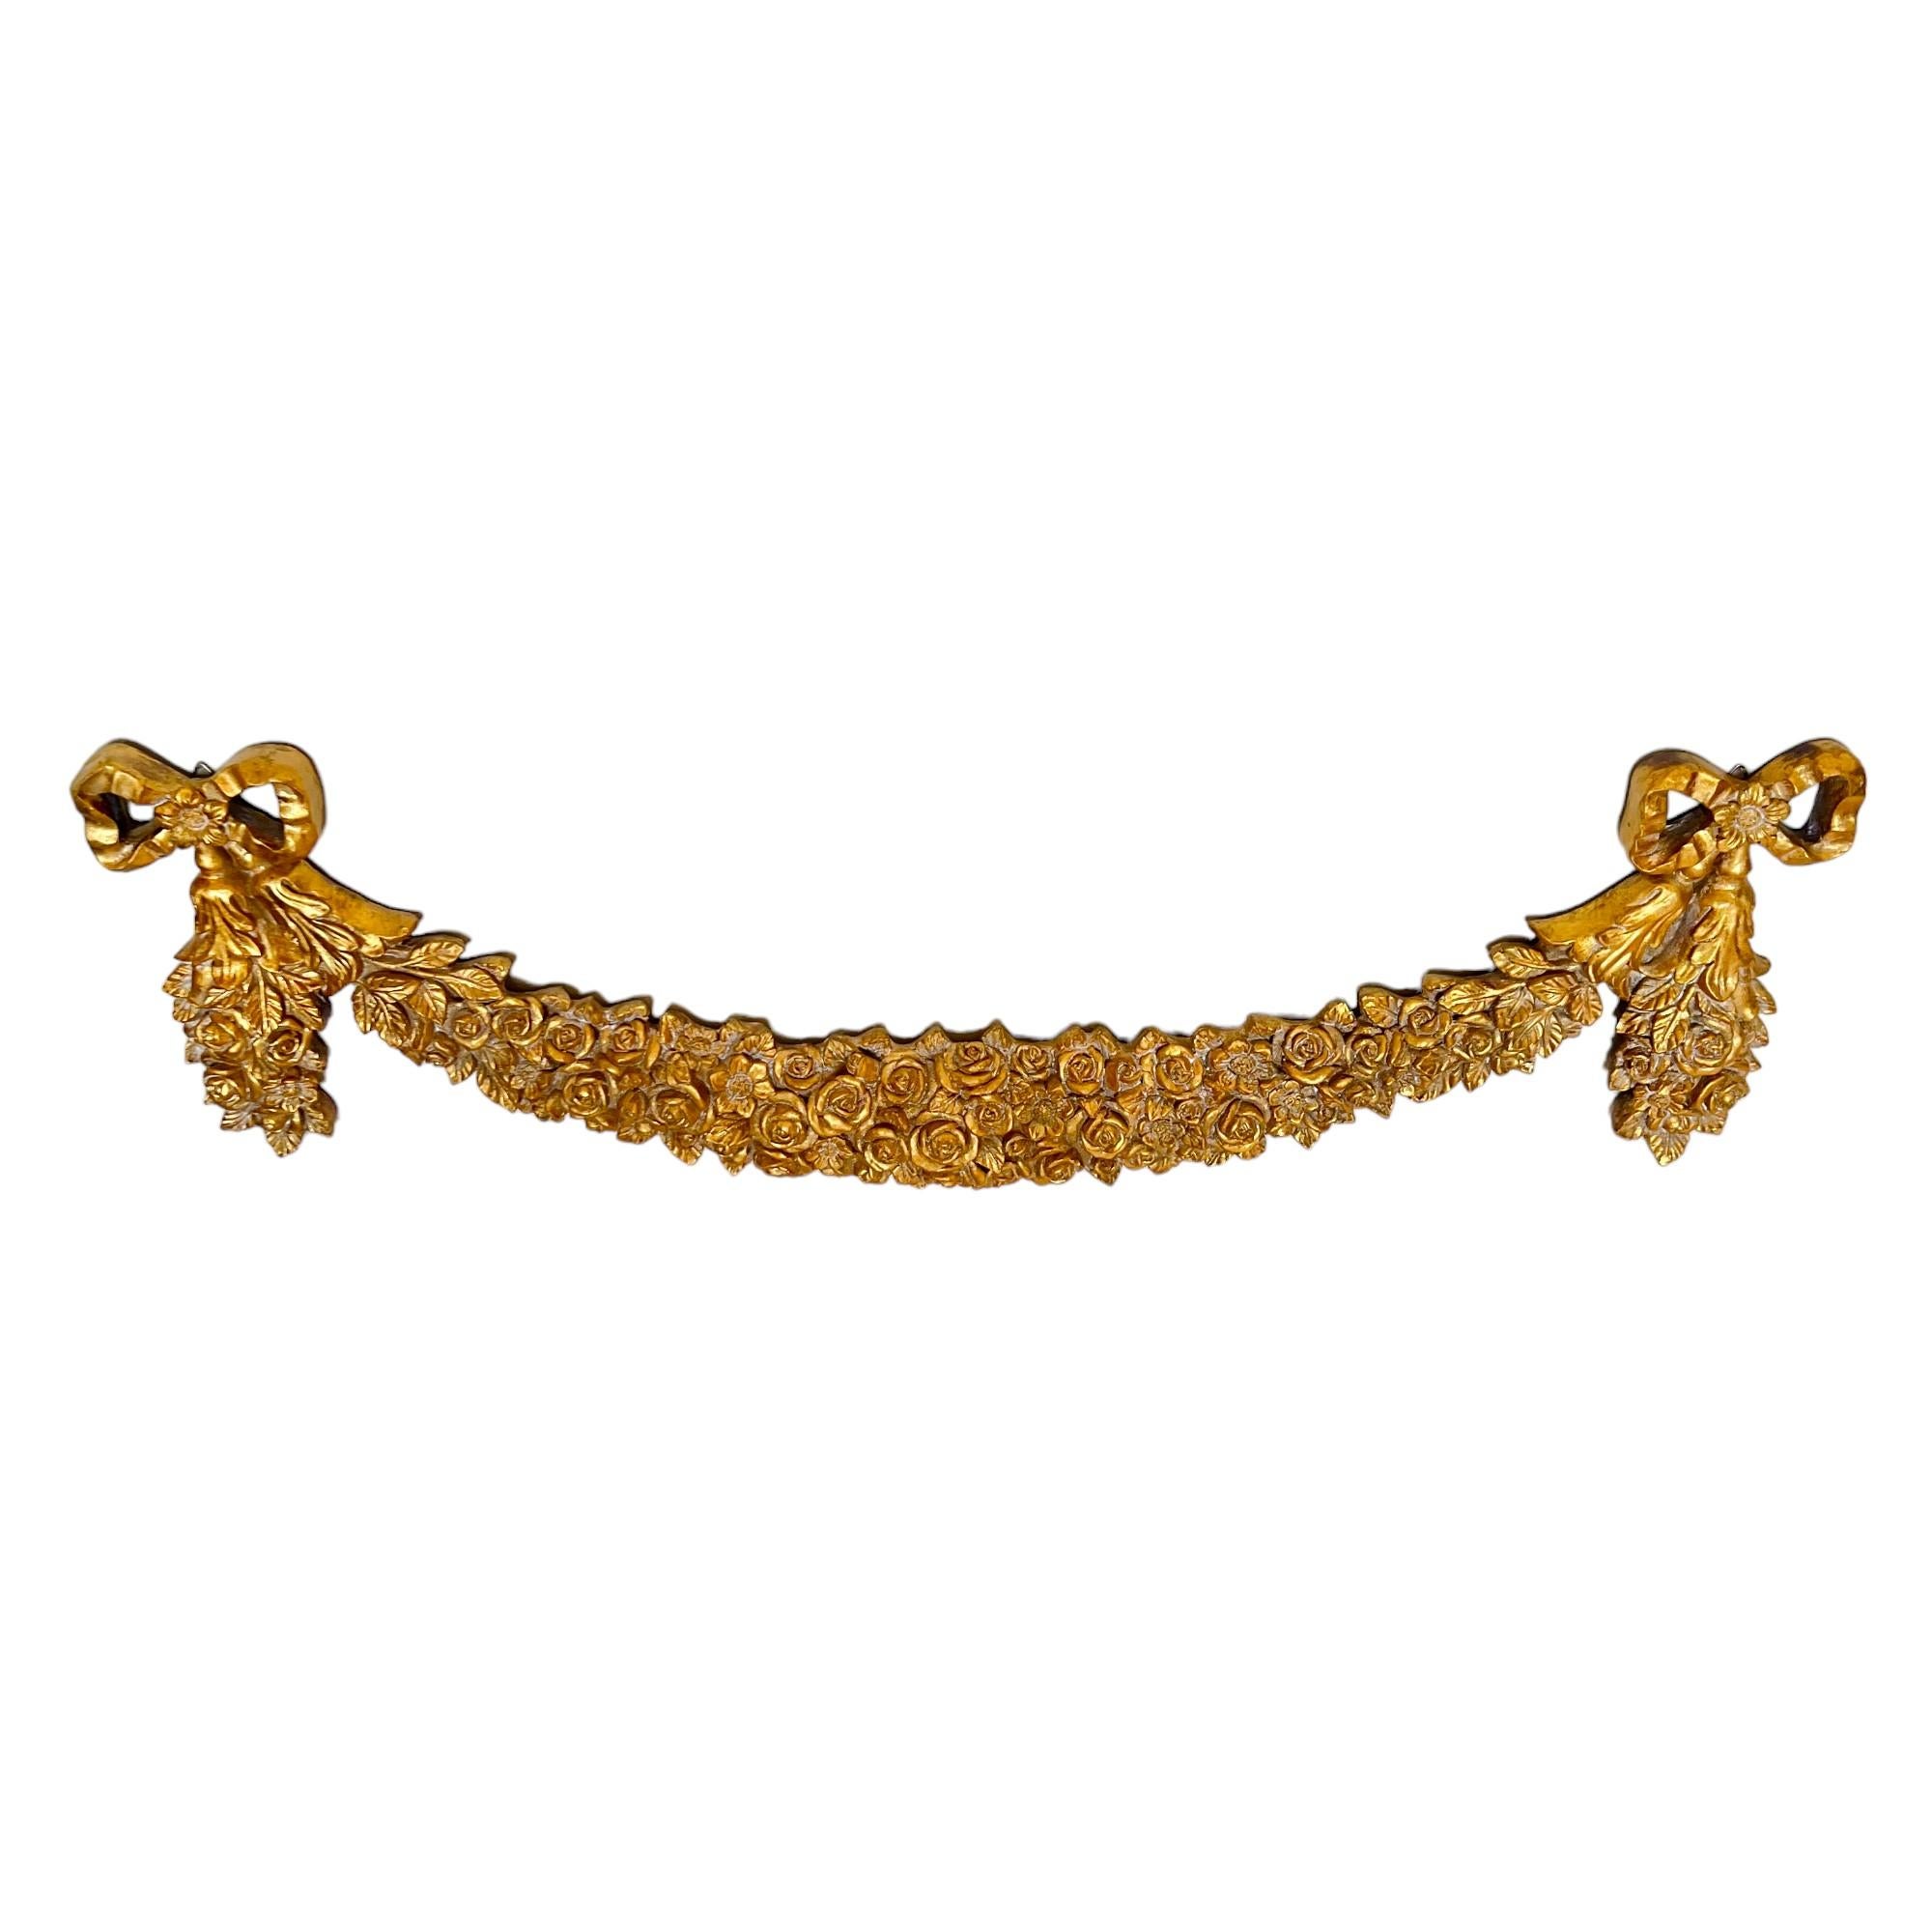 This exceptional Hollywood Regency style Italian gold gilt wall swag or festoon decoration features a floral and foliate motif strung between two large bows and extending down the drops. The resin form has been finished with gesso and gilded in gold